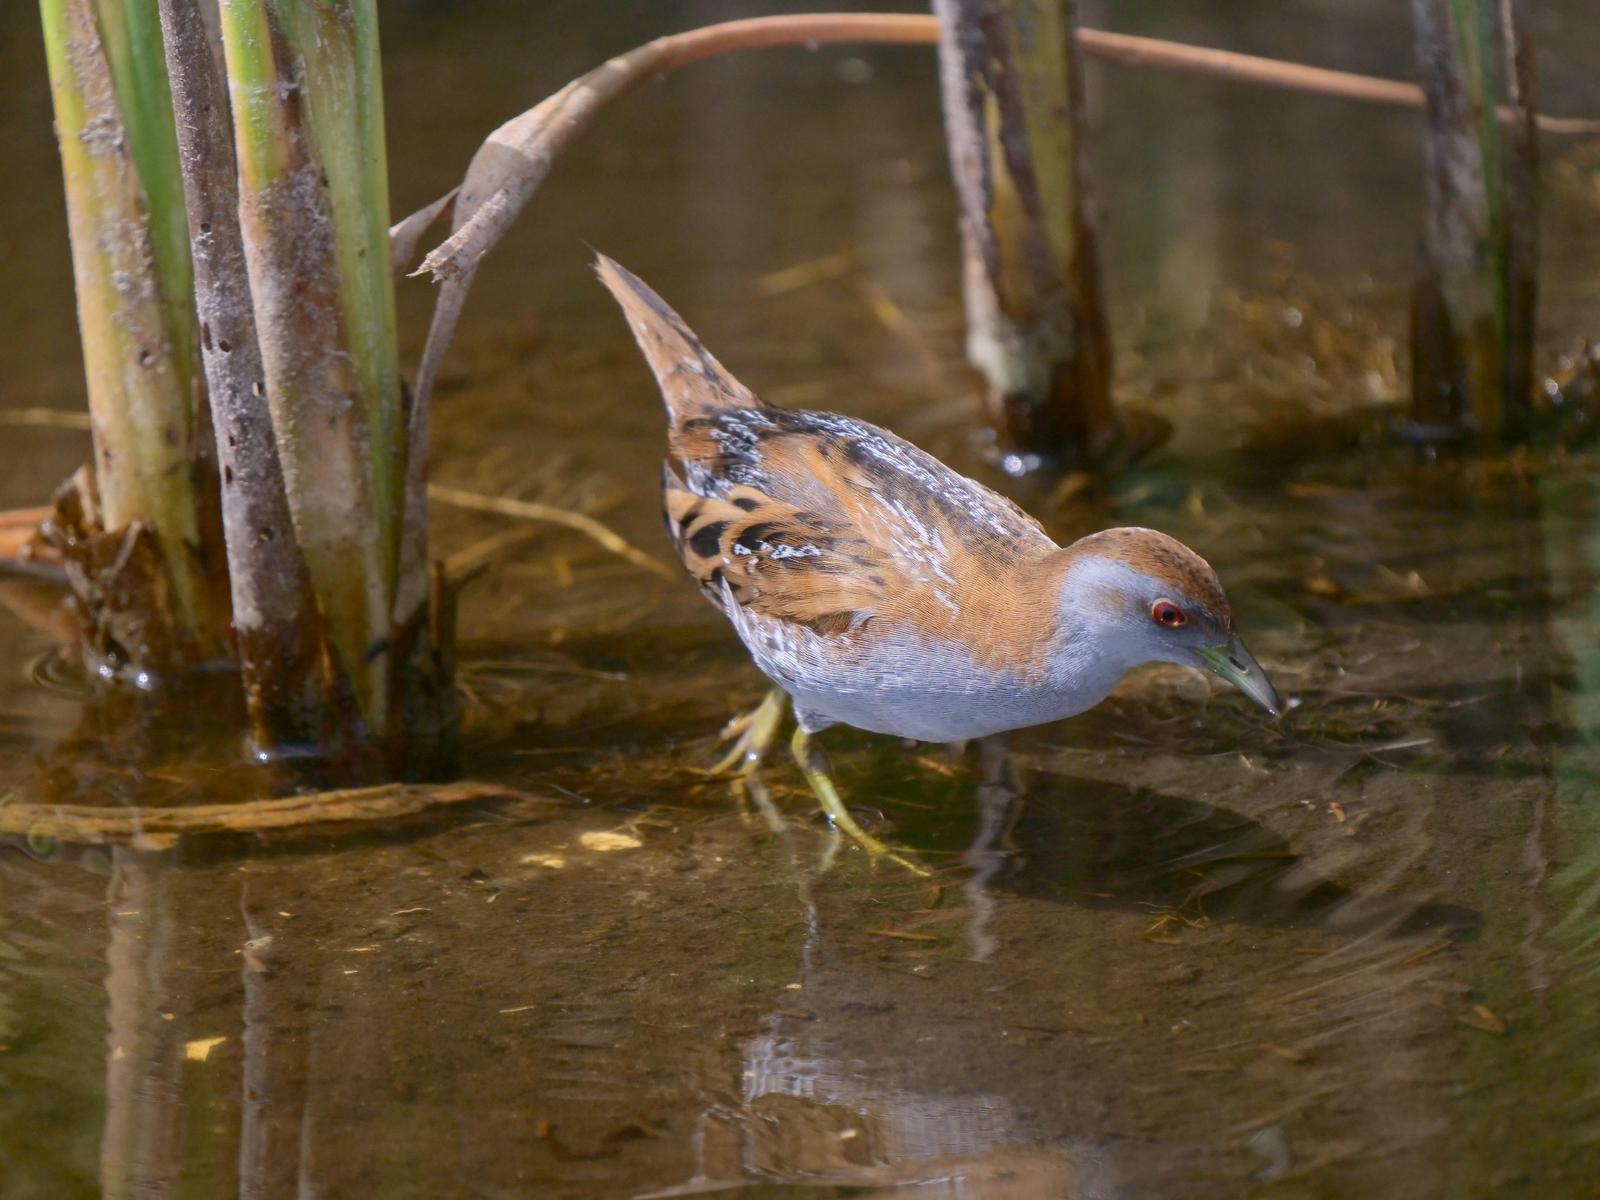 Baillon's Crake Photo by Peter Lowe